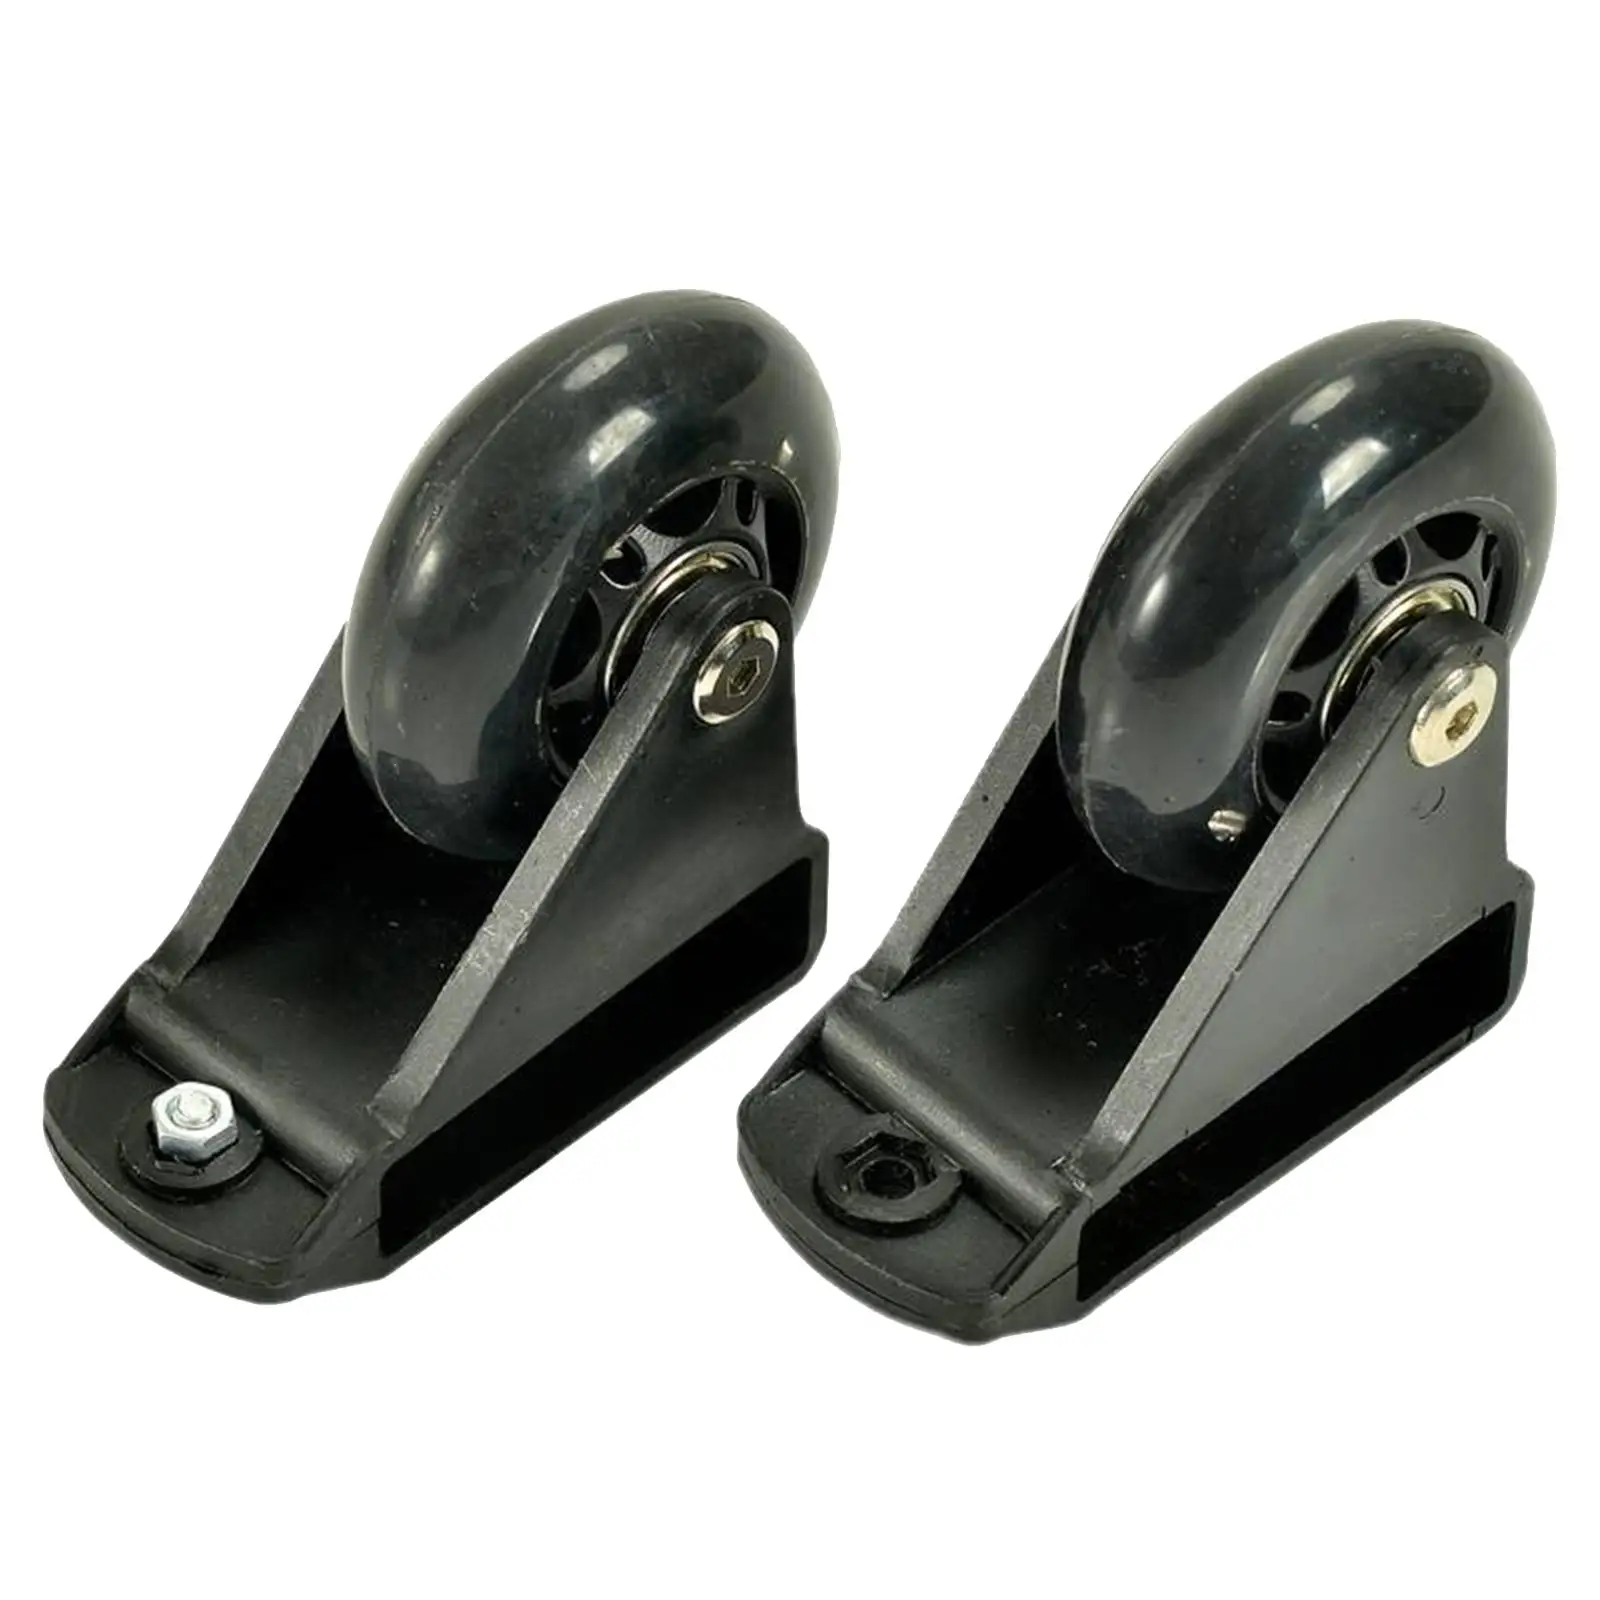 2 Pieces Leveling Casters Ladder Balance Bar Wheels for Equipment Shelves